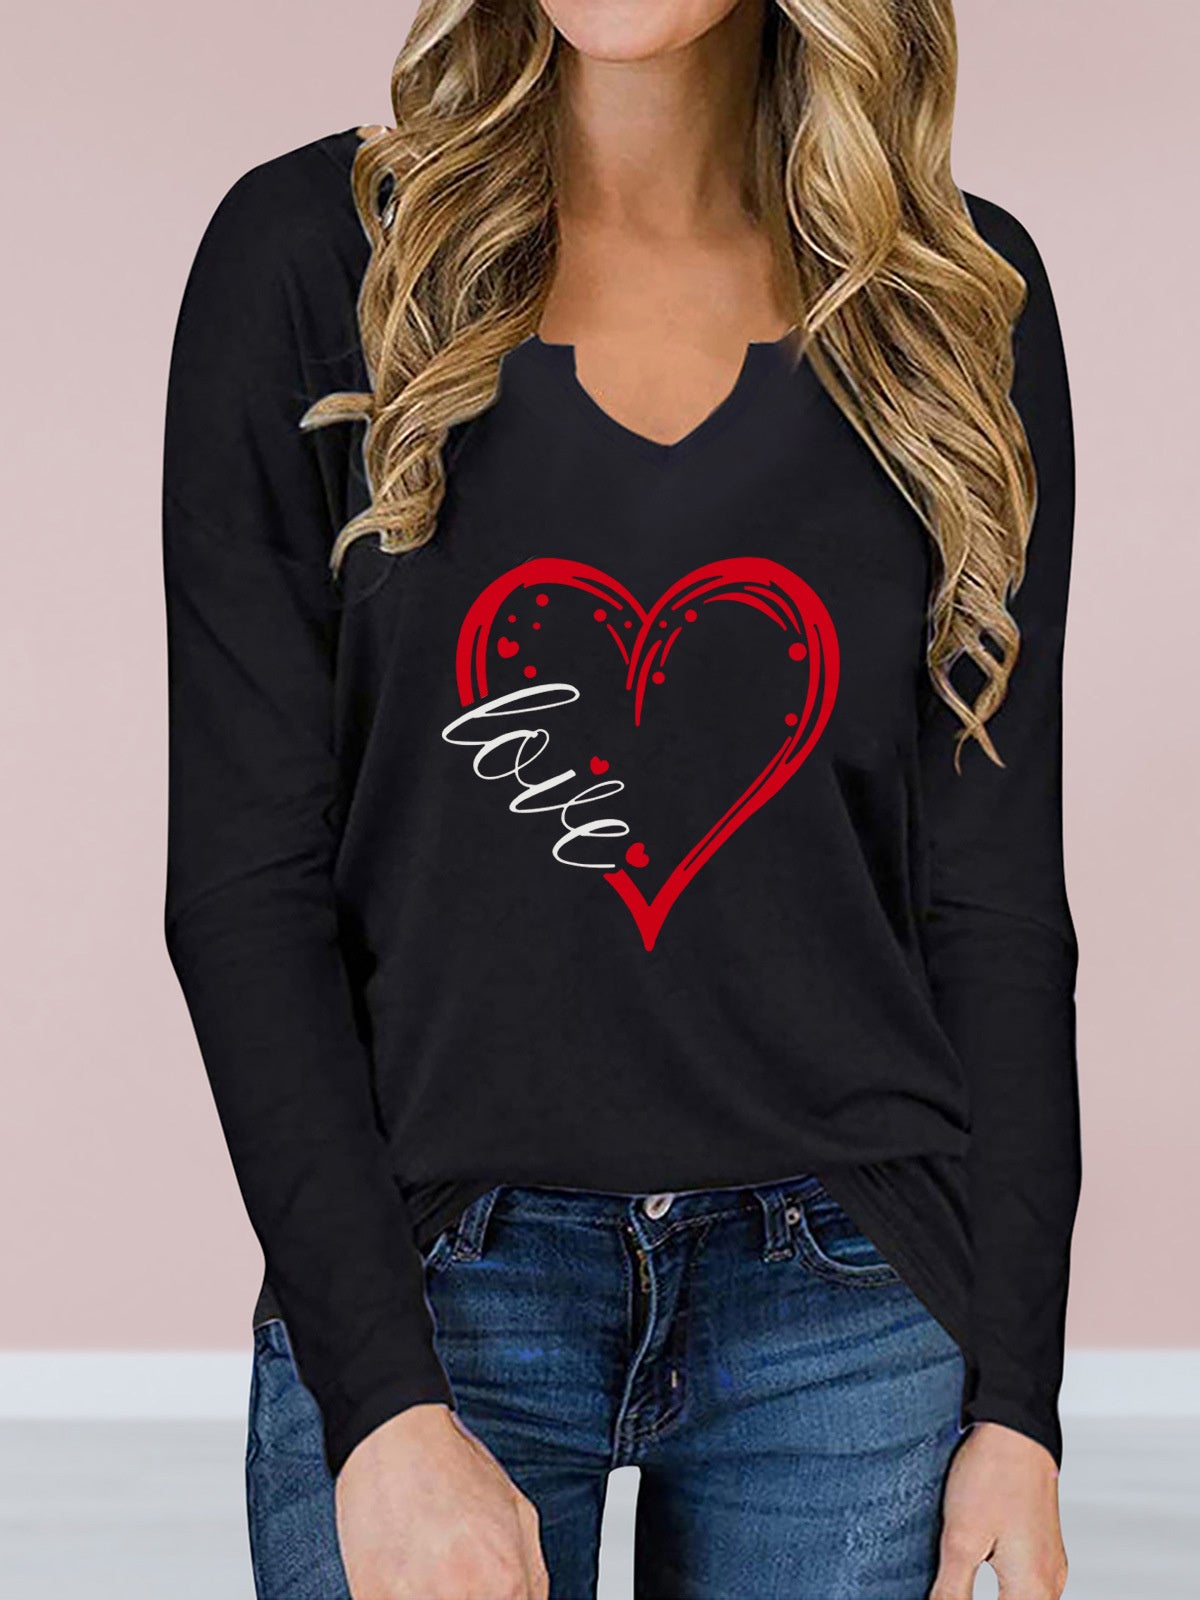 Women's V-neck Long Sleeve Graphic Printed Top